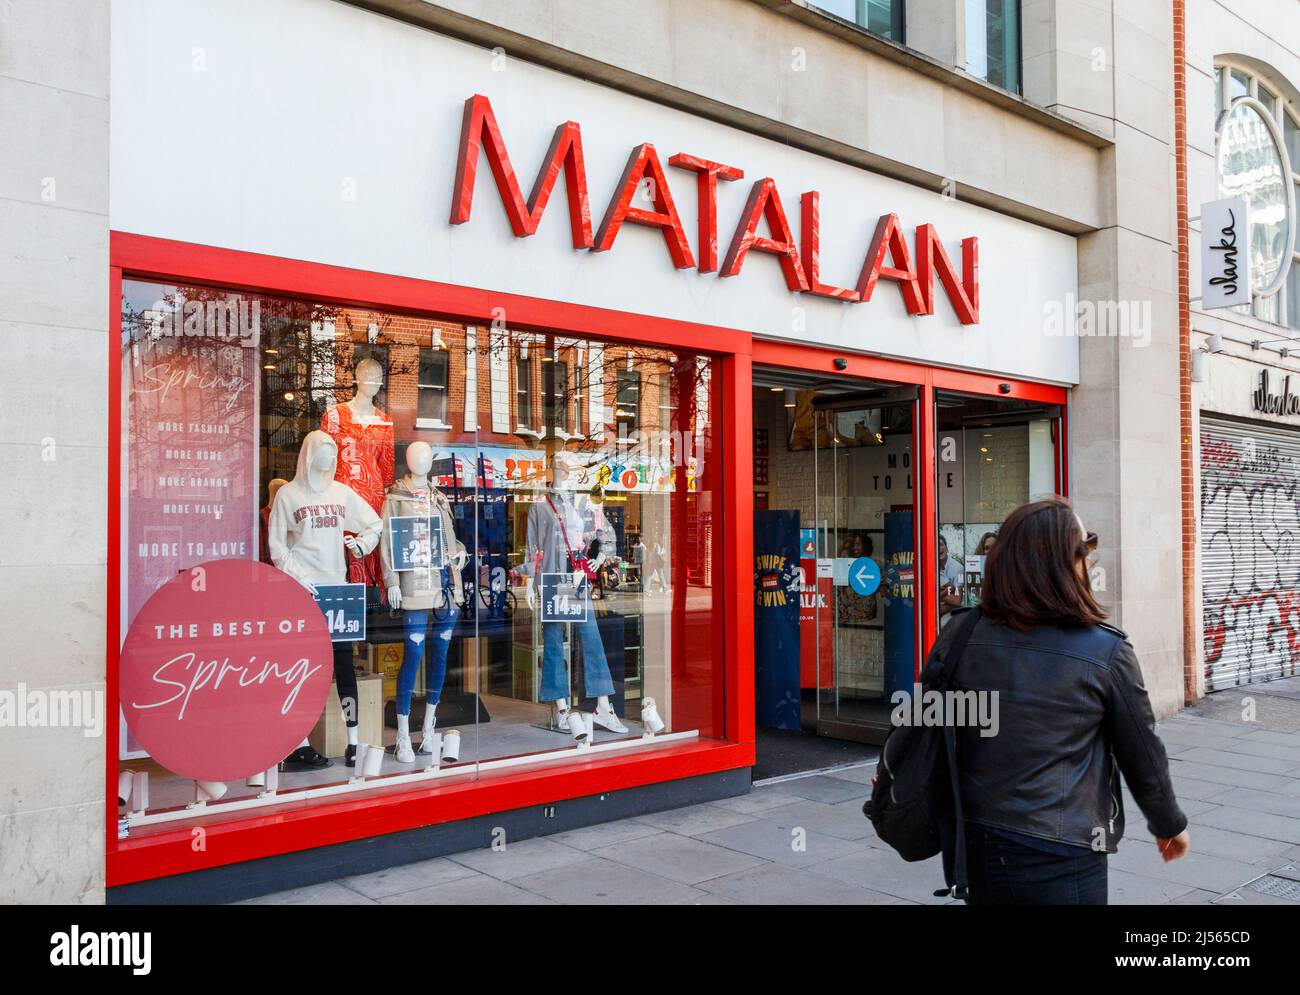 A branch of Matalan, a retail clothing and homeware store, on Oxford Street, London, UK Stock Photo